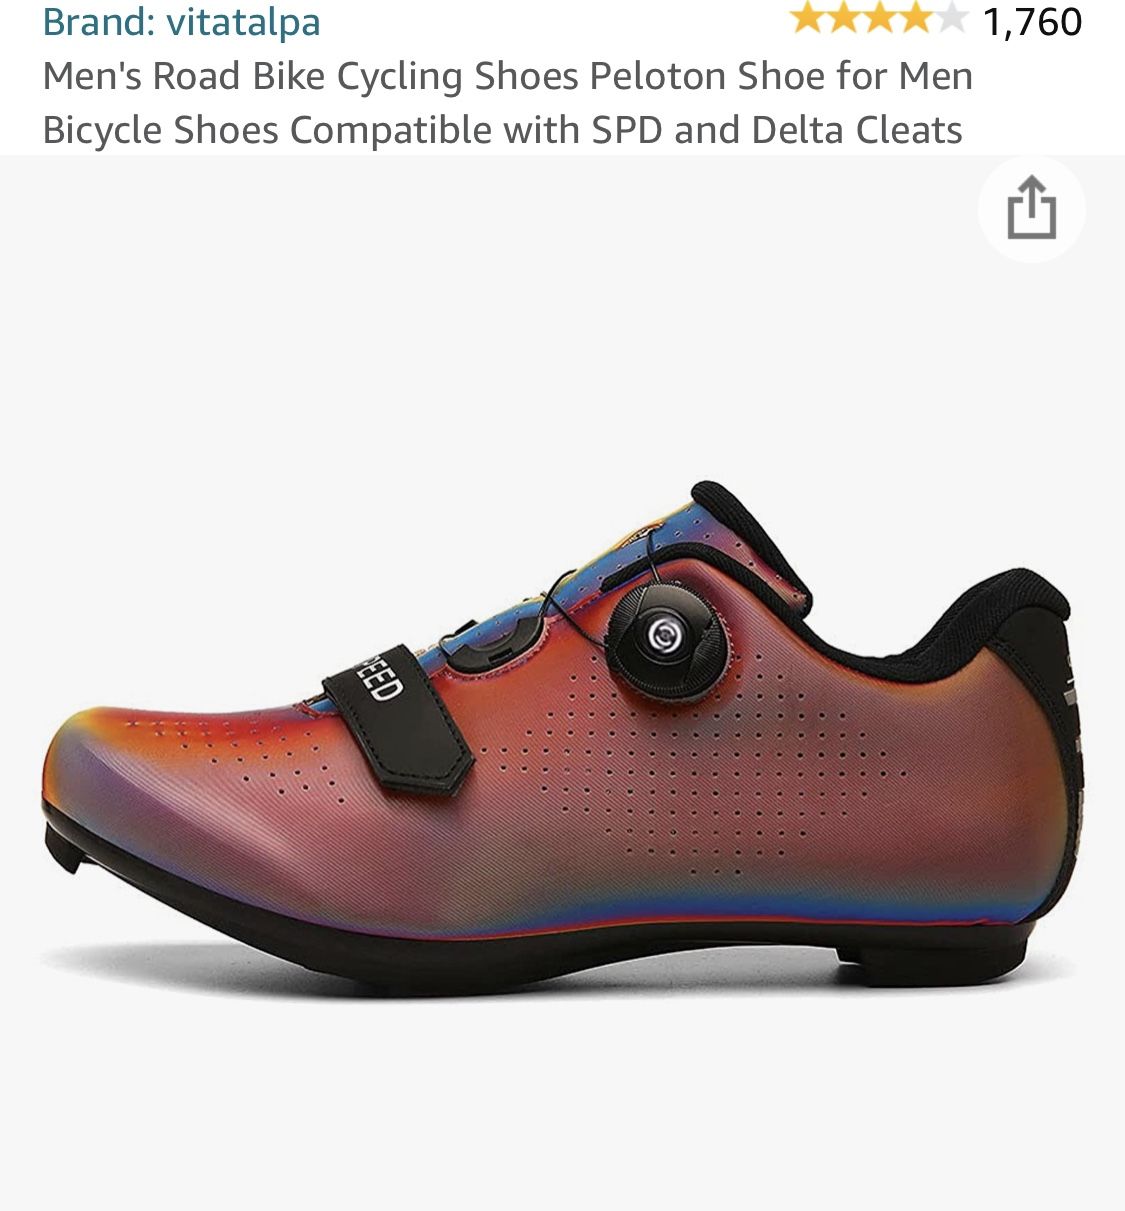 NEW & UNUSED Peloton Shoes with Delta Cleats